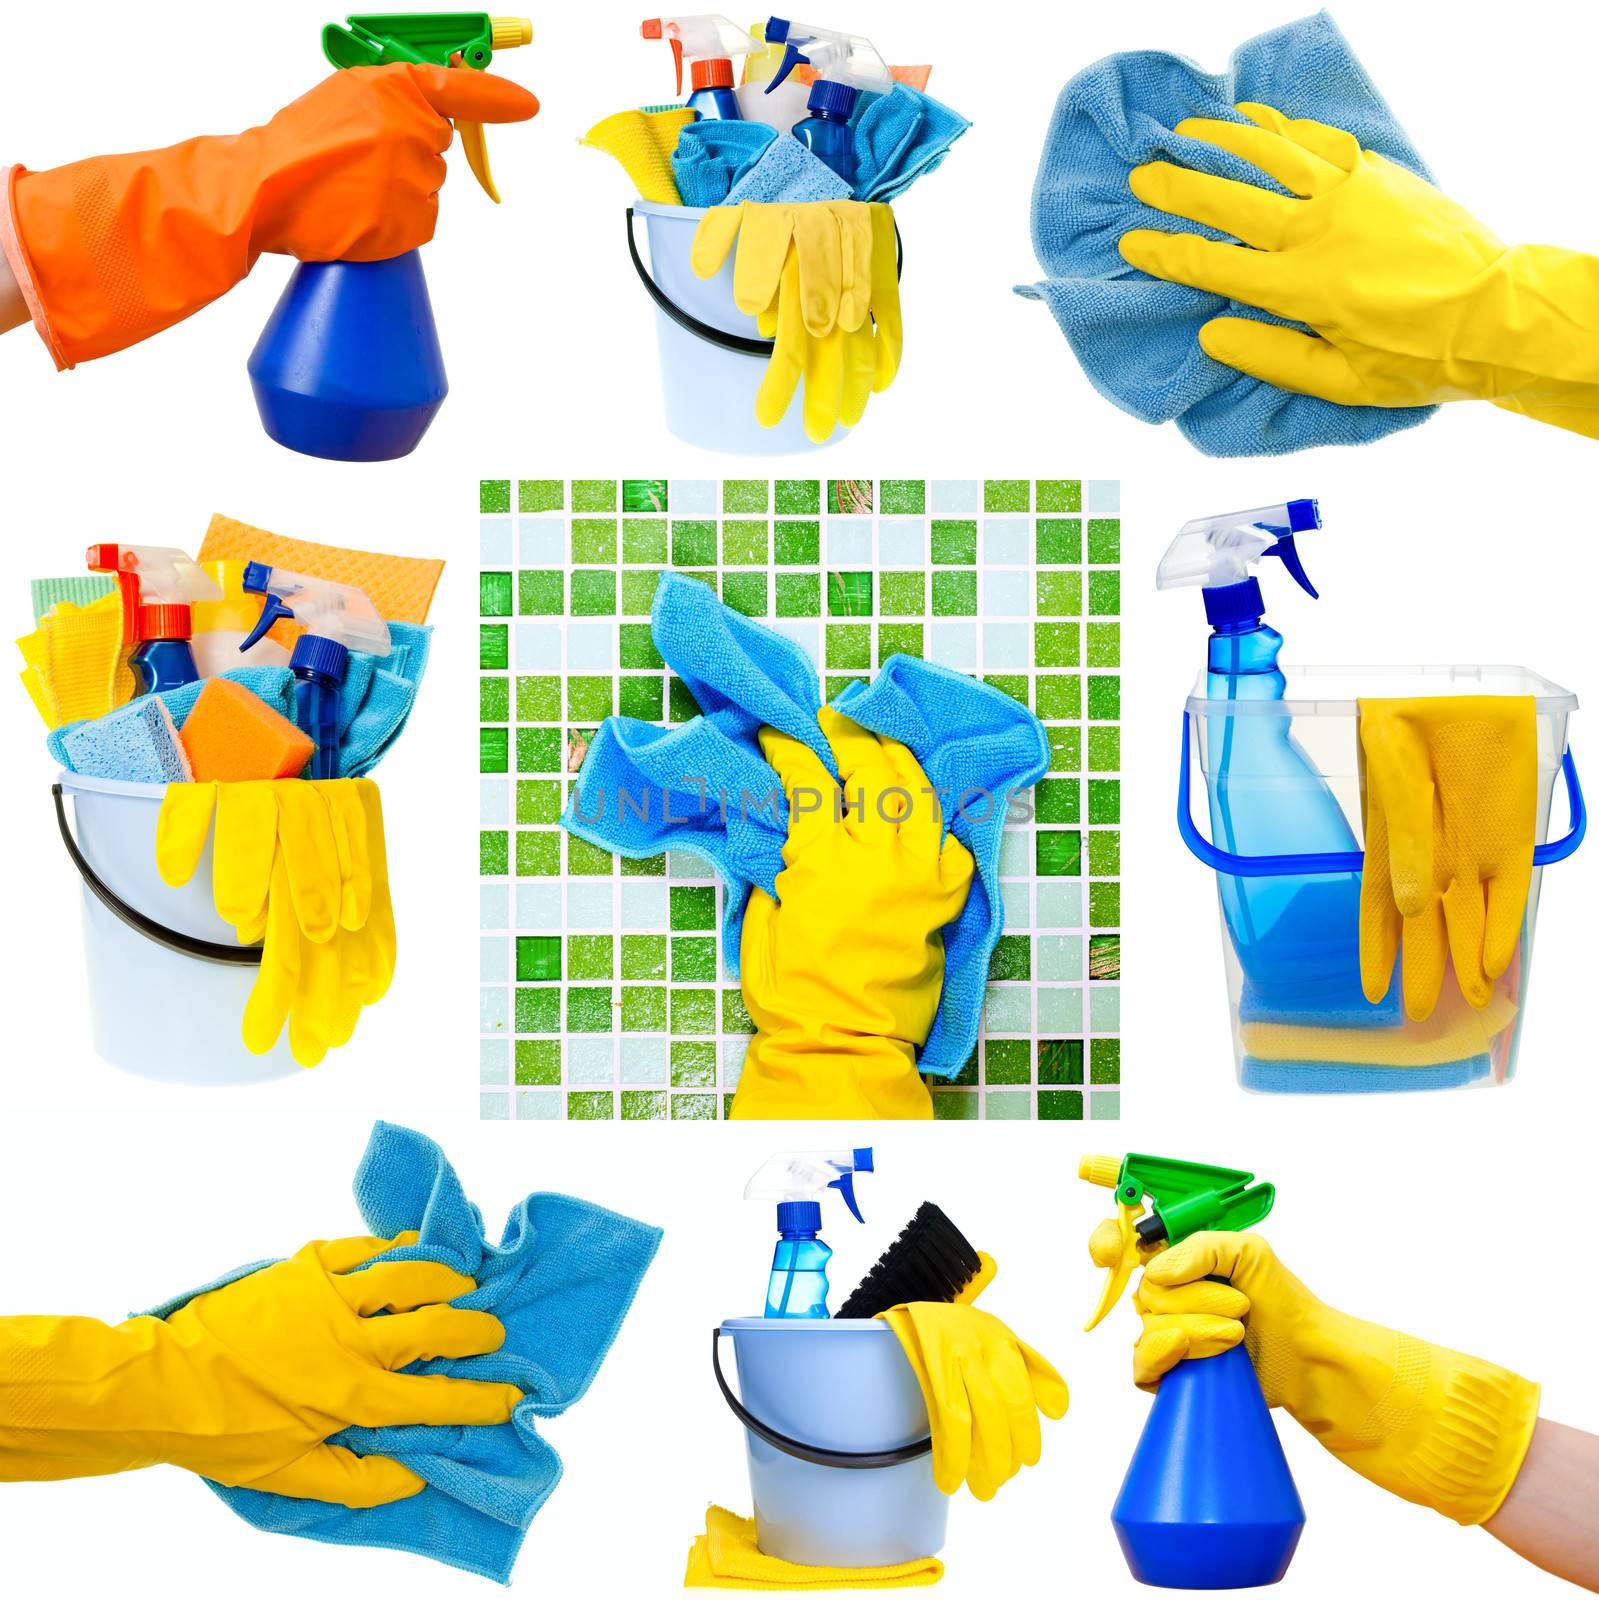 Collection of cleaning supplies on white background